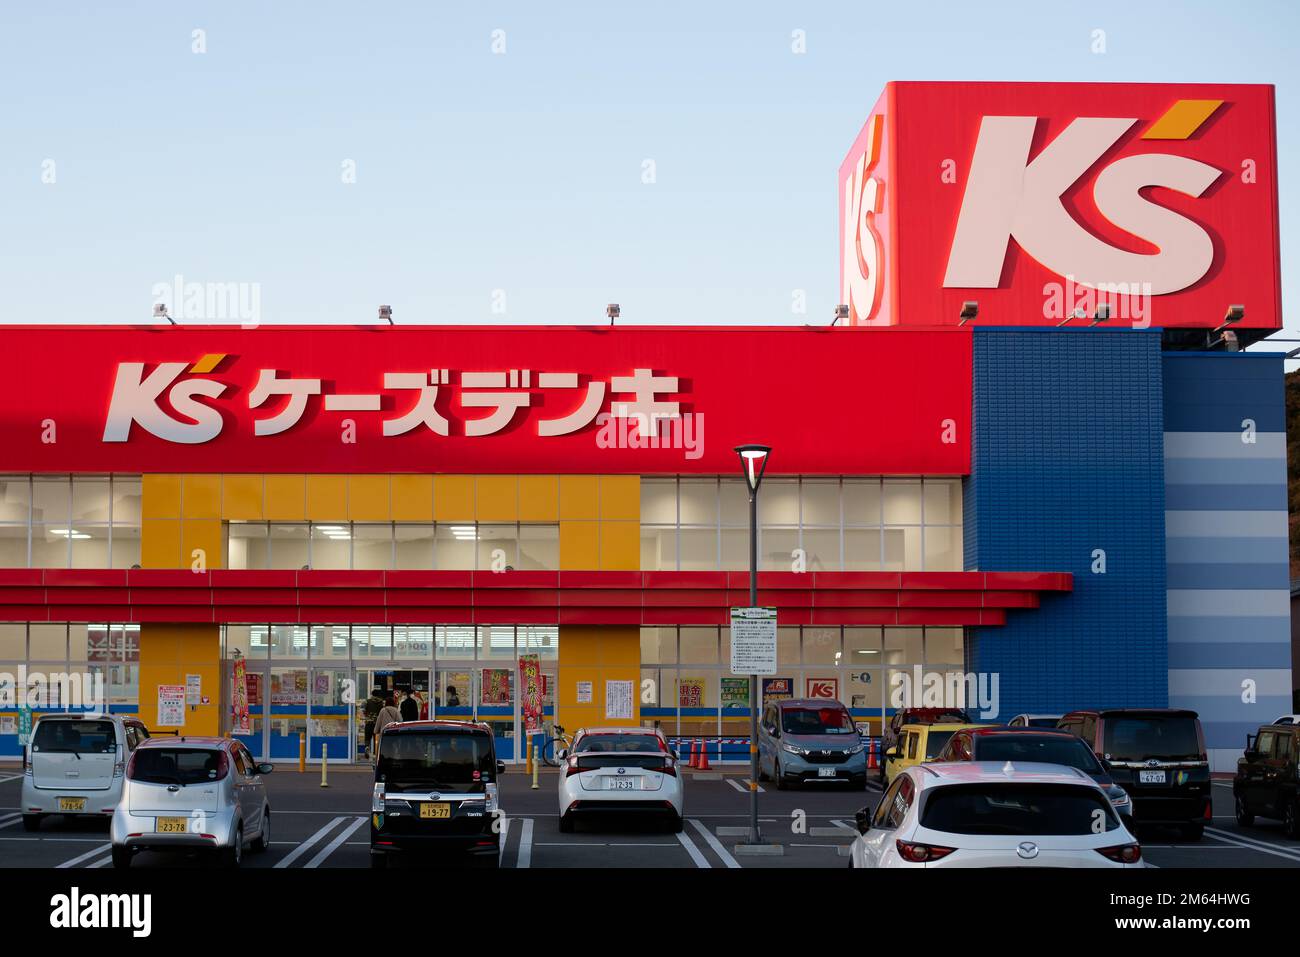 K's Denki is an electronic and appliance store in Japan Stock Photo